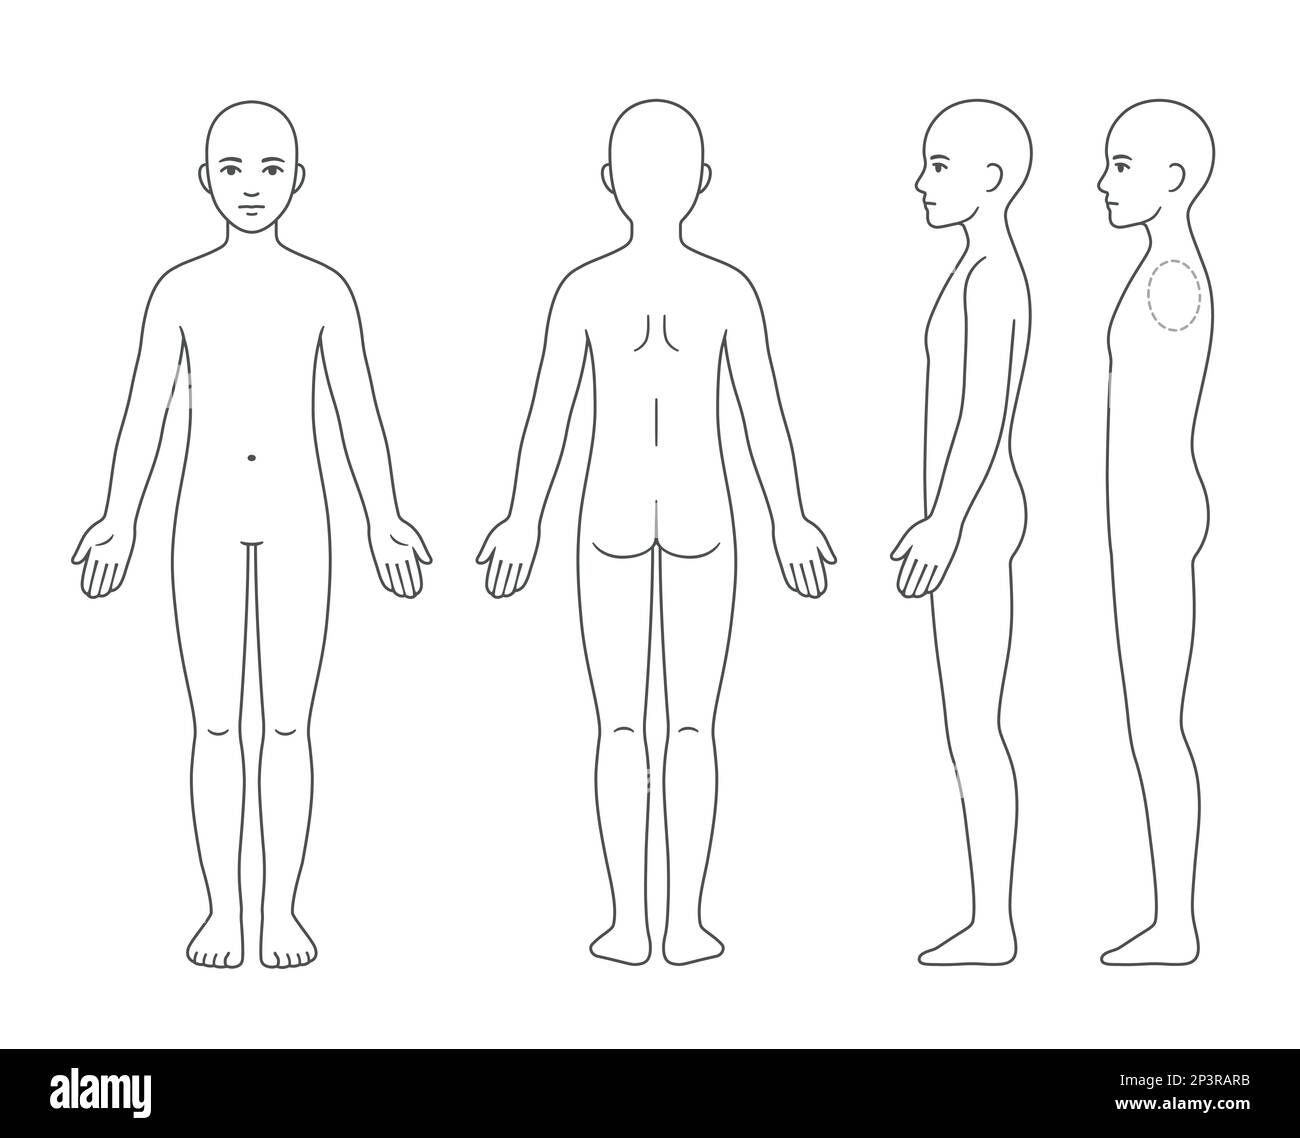 https://c8.alamy.com/comp/2P3RARB/unisex-body-anatomy-chart-naked-young-person-of-undefined-gender-front-back-and-side-view-blank-template-for-medical-infographic-isolated-vector-2P3RARB.jpg